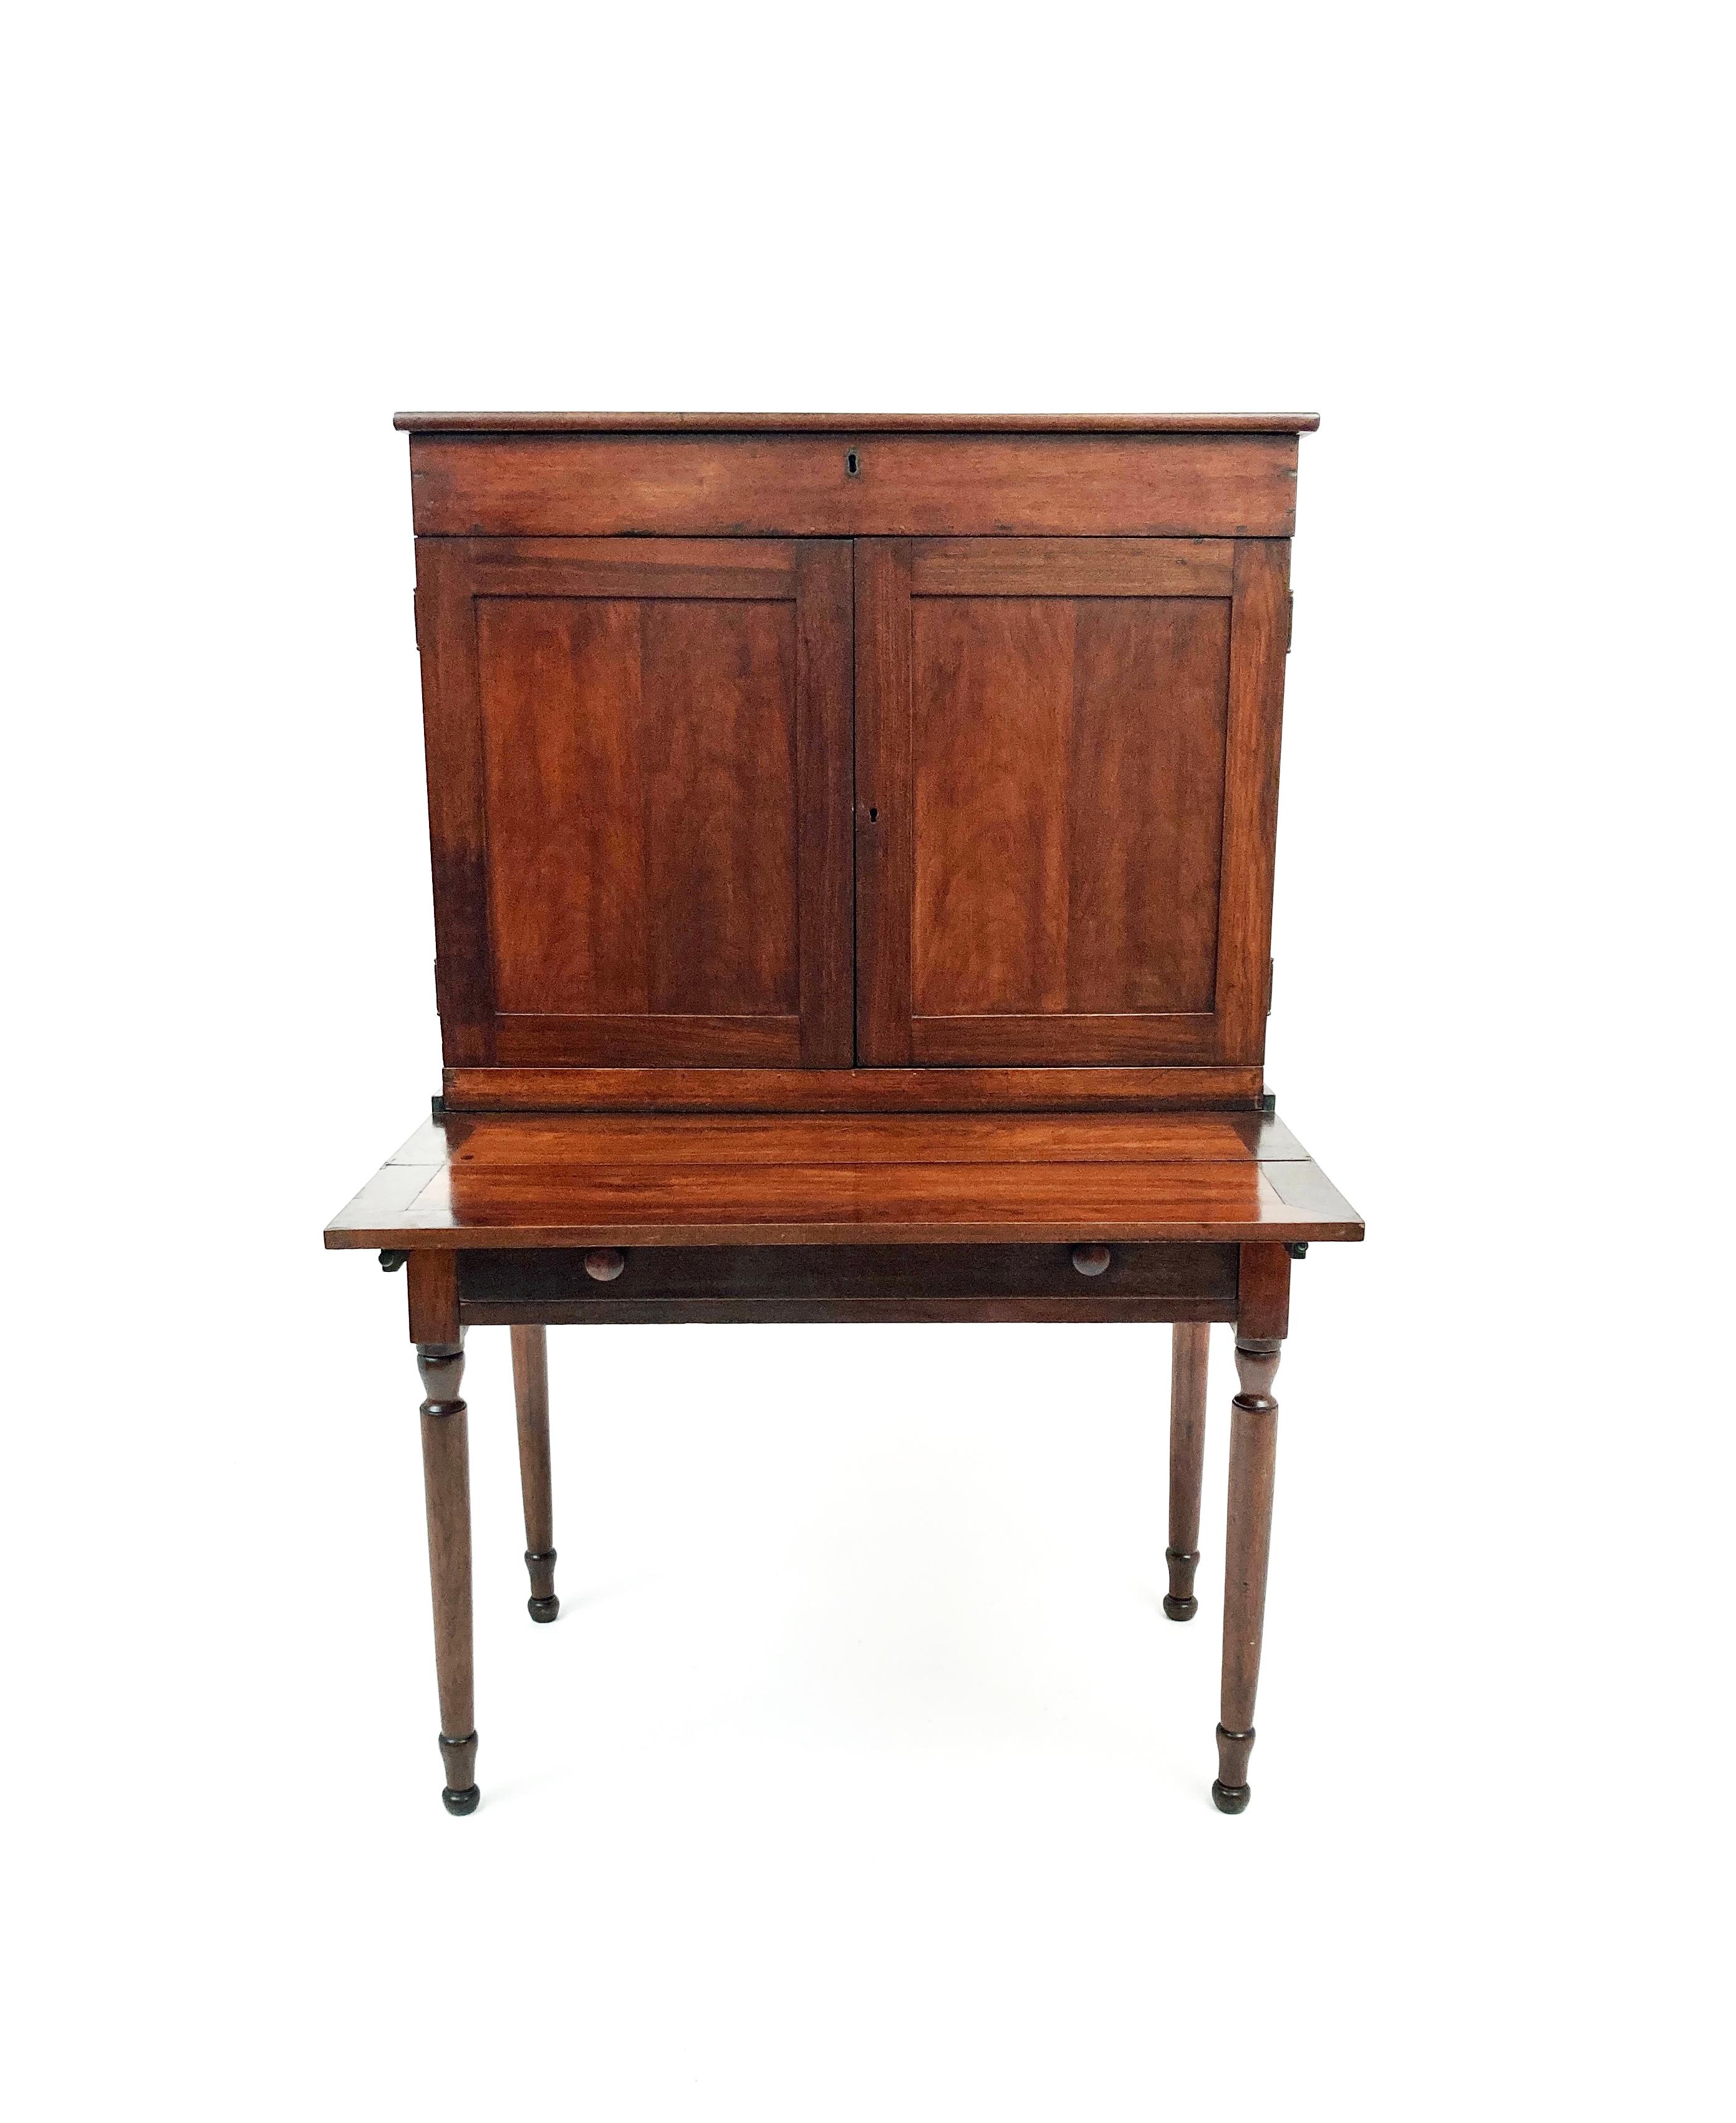 Circa 1830's, this walnut Federal Sheraton style plantation desk has a single front drawer on the lower desk and double doors on the upper piece. The double doors open to reveal intricate nooks and a drawer for storage. There is a hidden storage